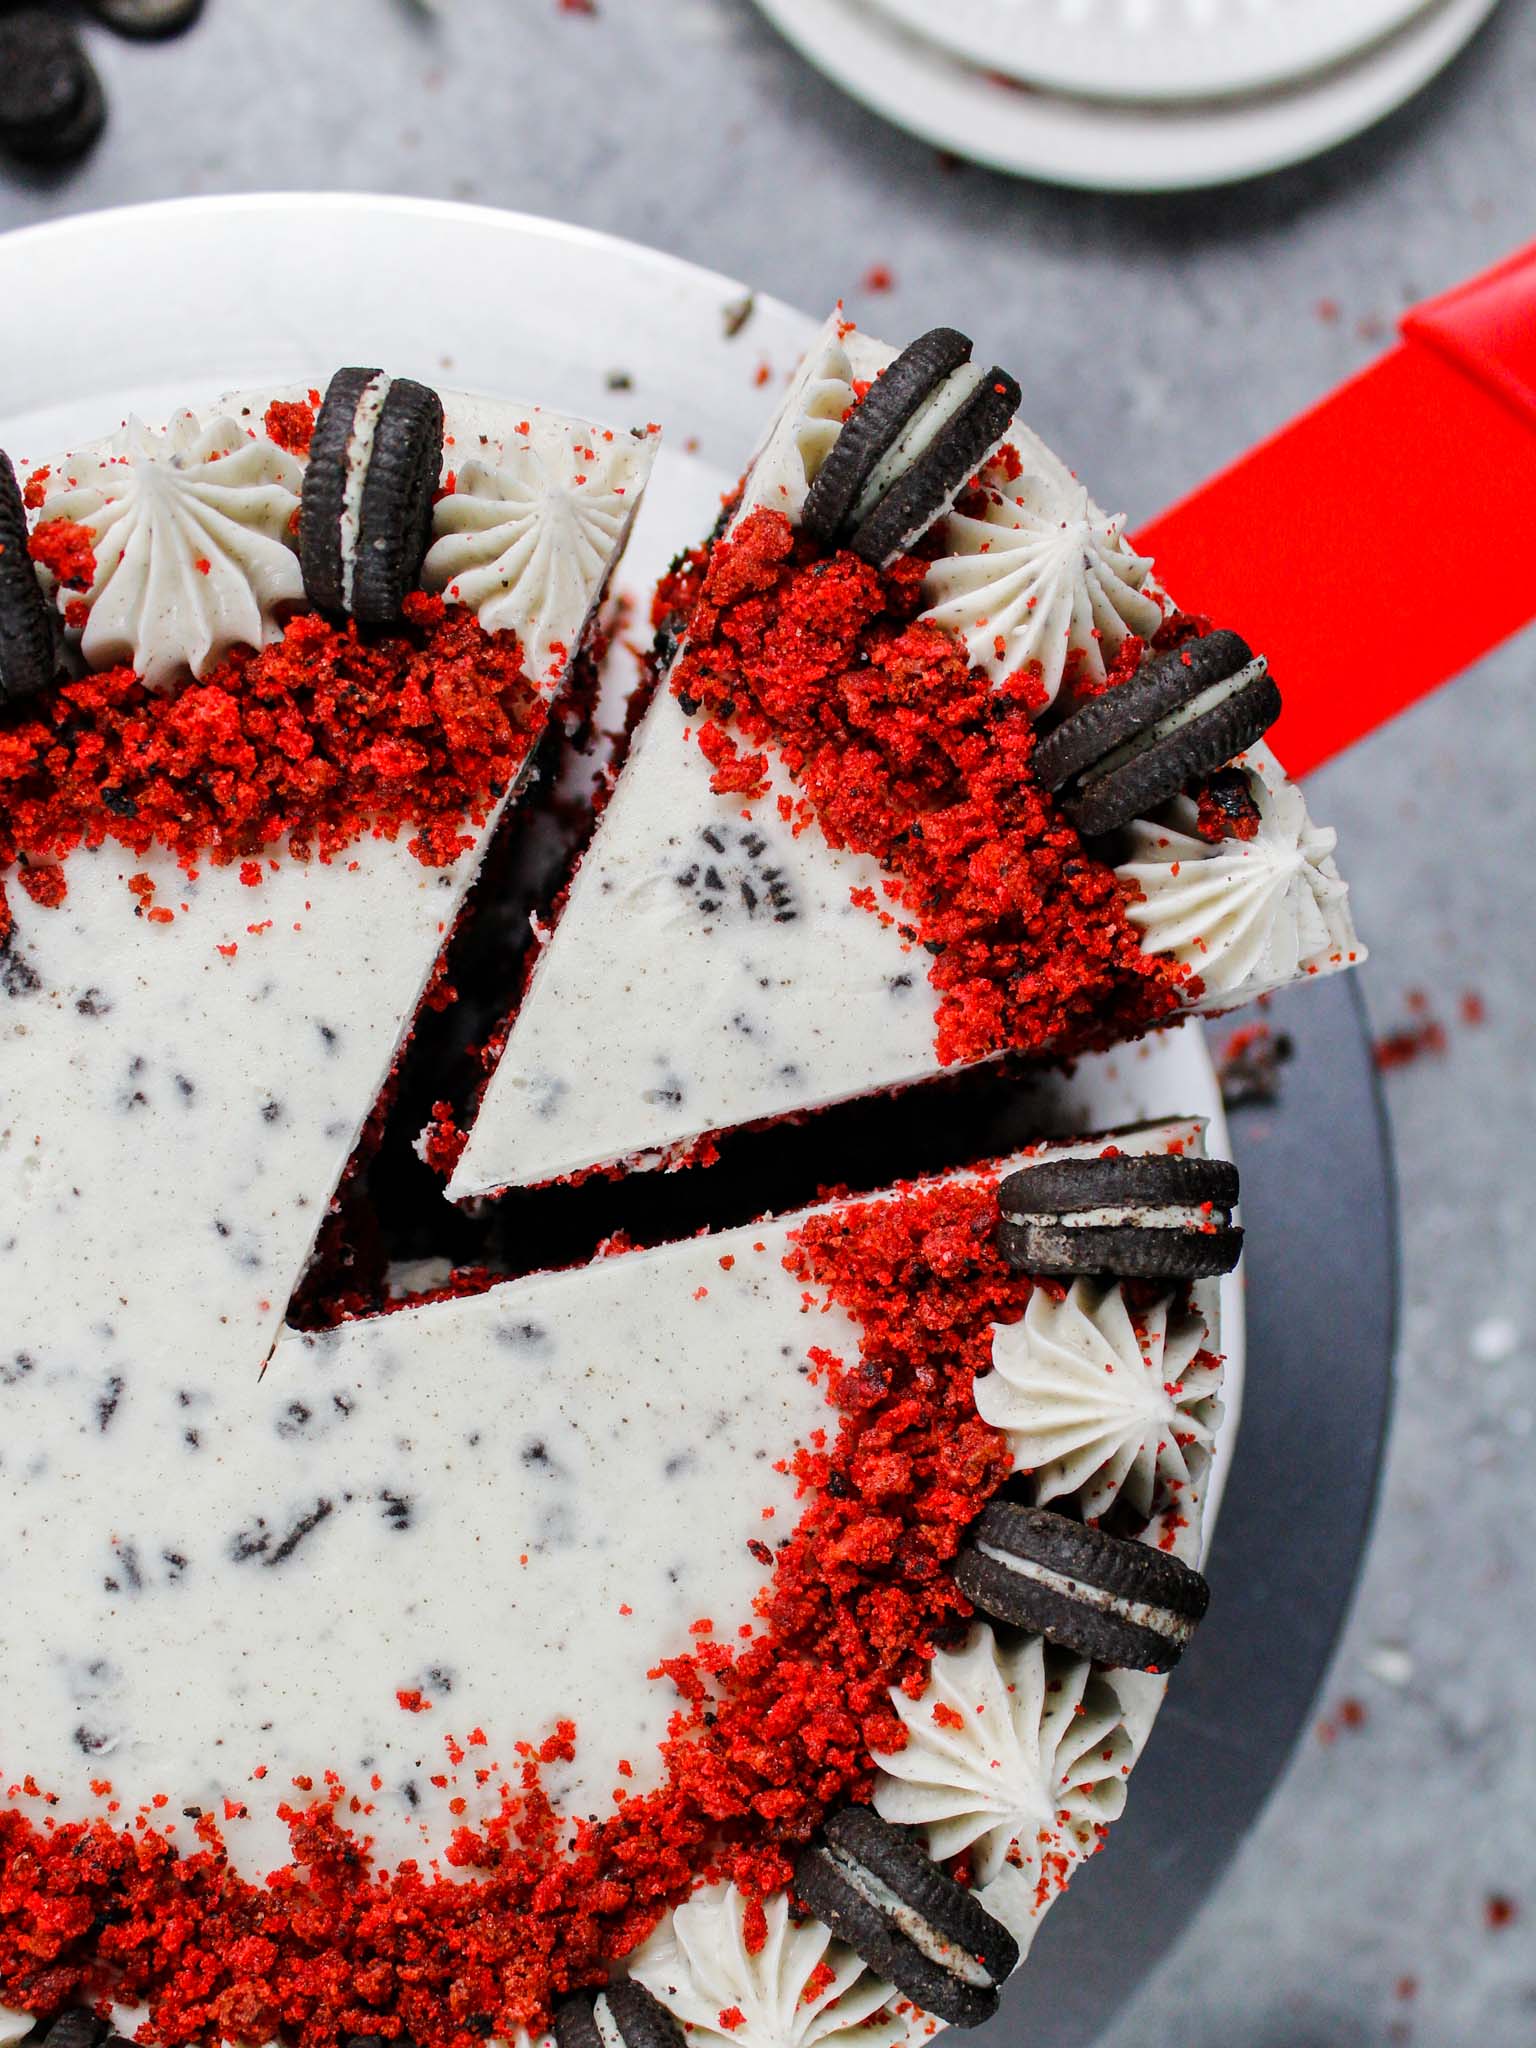 image of a slice of red velvet oreo cake that's frosted with an oreo red velvet cream cheese frosting